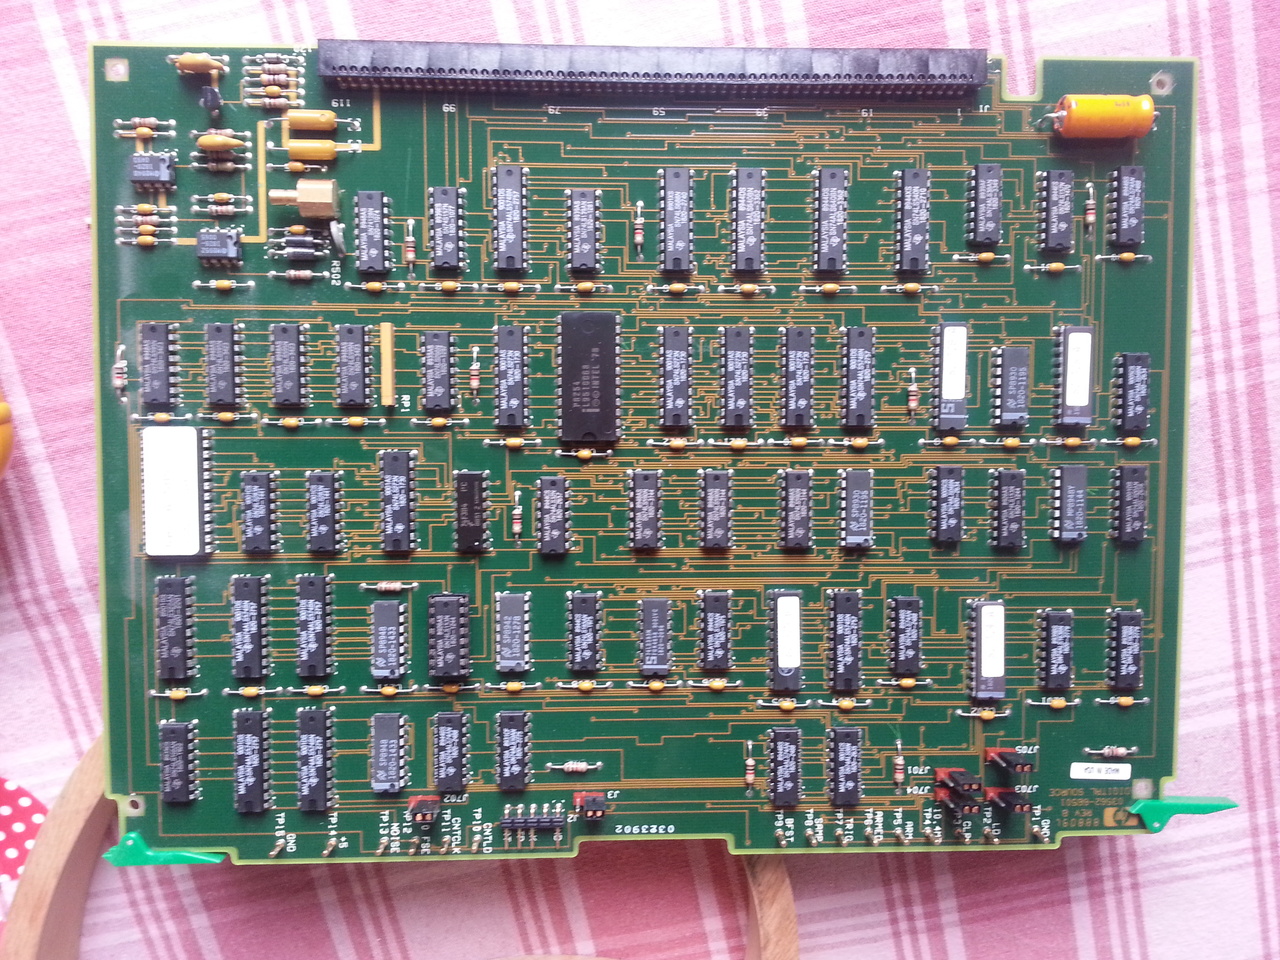 Picture of the A1 Digital Source PCB of the HP3562A